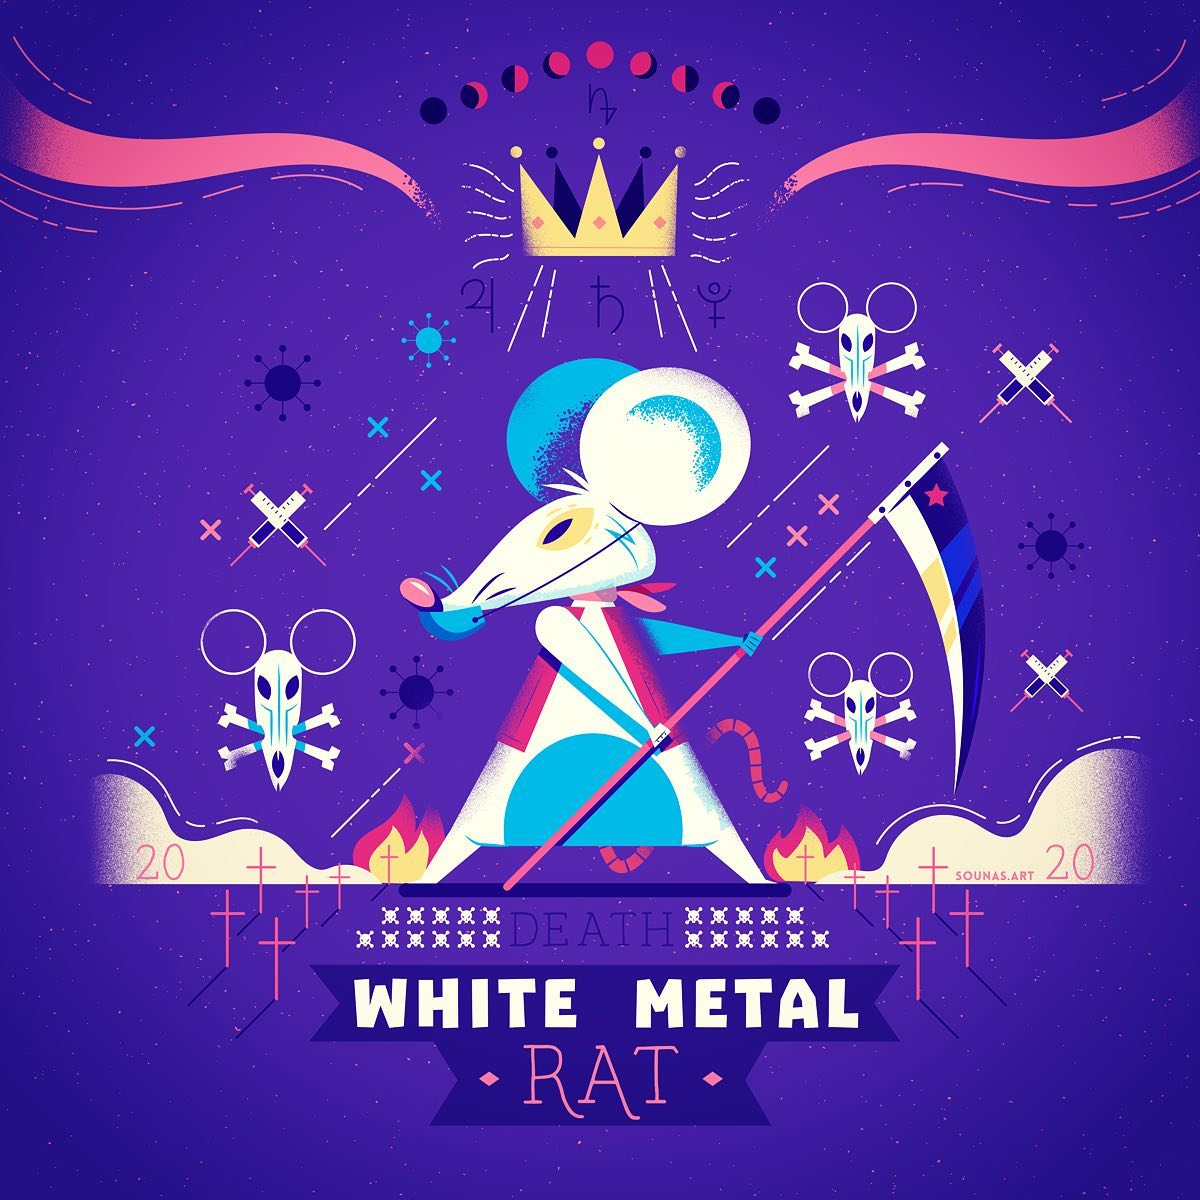 :::Are you paying attention?:::..#death #rat #deathrat #illustration #vectorart #vectorillustration #deathtoll #nwo #watchout #1984 #whitemetalrat